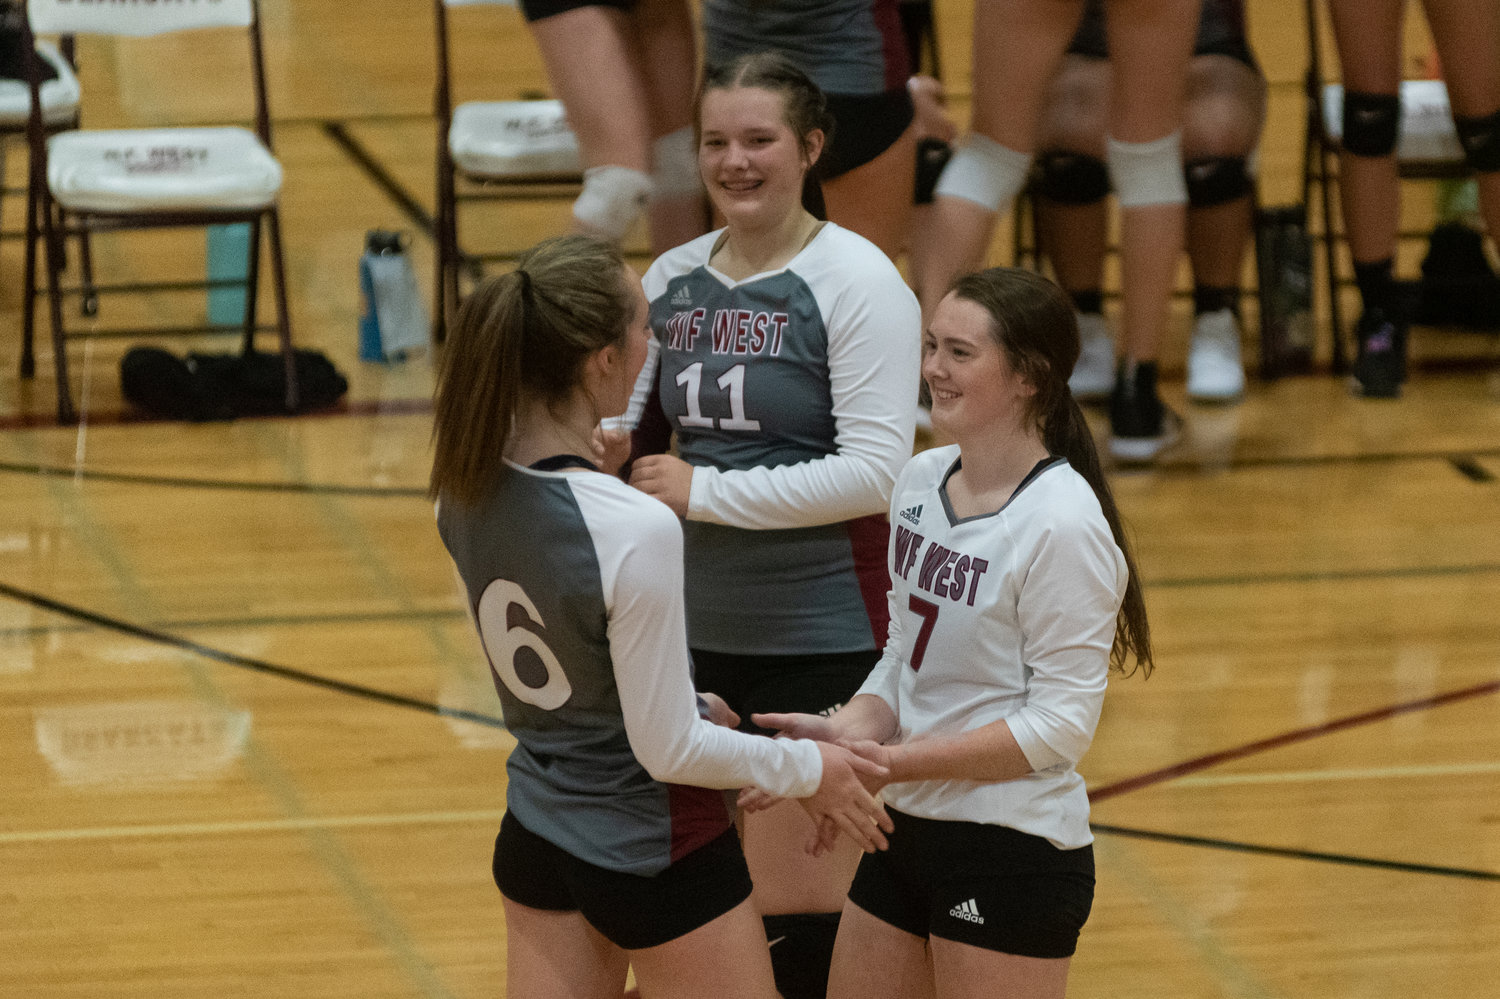 FILE PHOTO -- W.F. West volleyball players Kambriah Simper (7), Morgan Rogerson (6), and Savannah Hawkins (11) celebrate a point against Aberdeen Oct. 26.